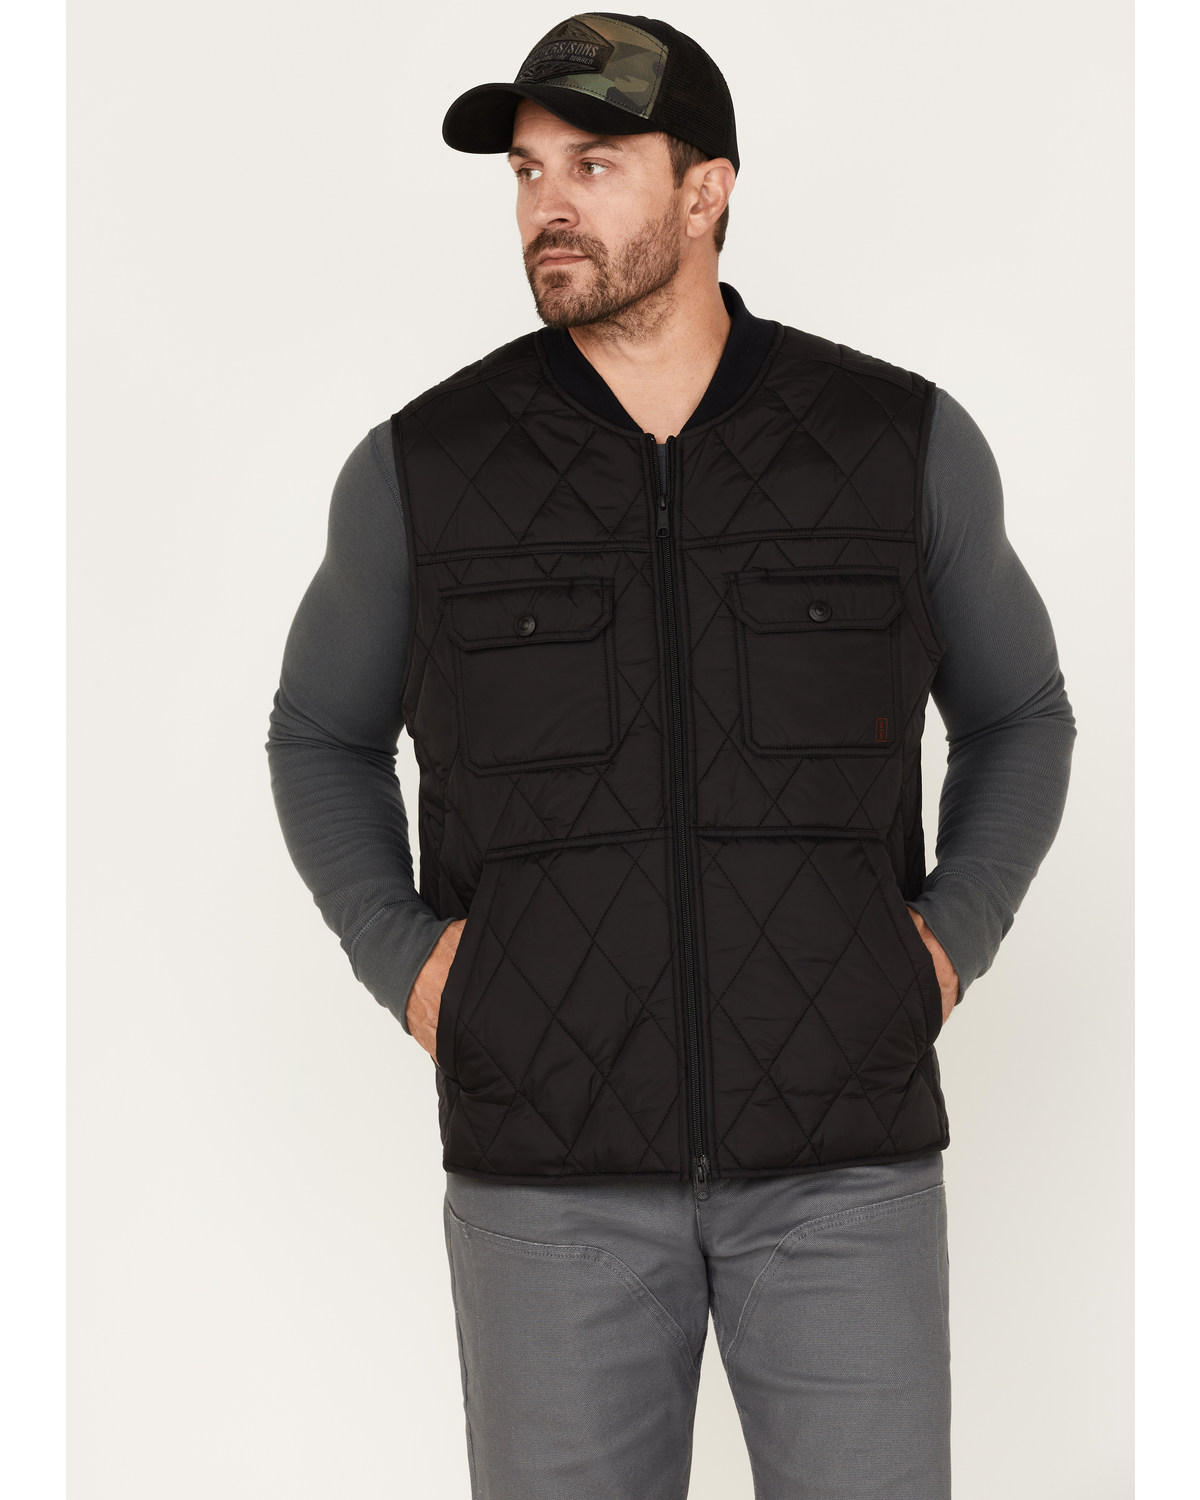 Brothers and Sons Men's Quilted Varsity Vest